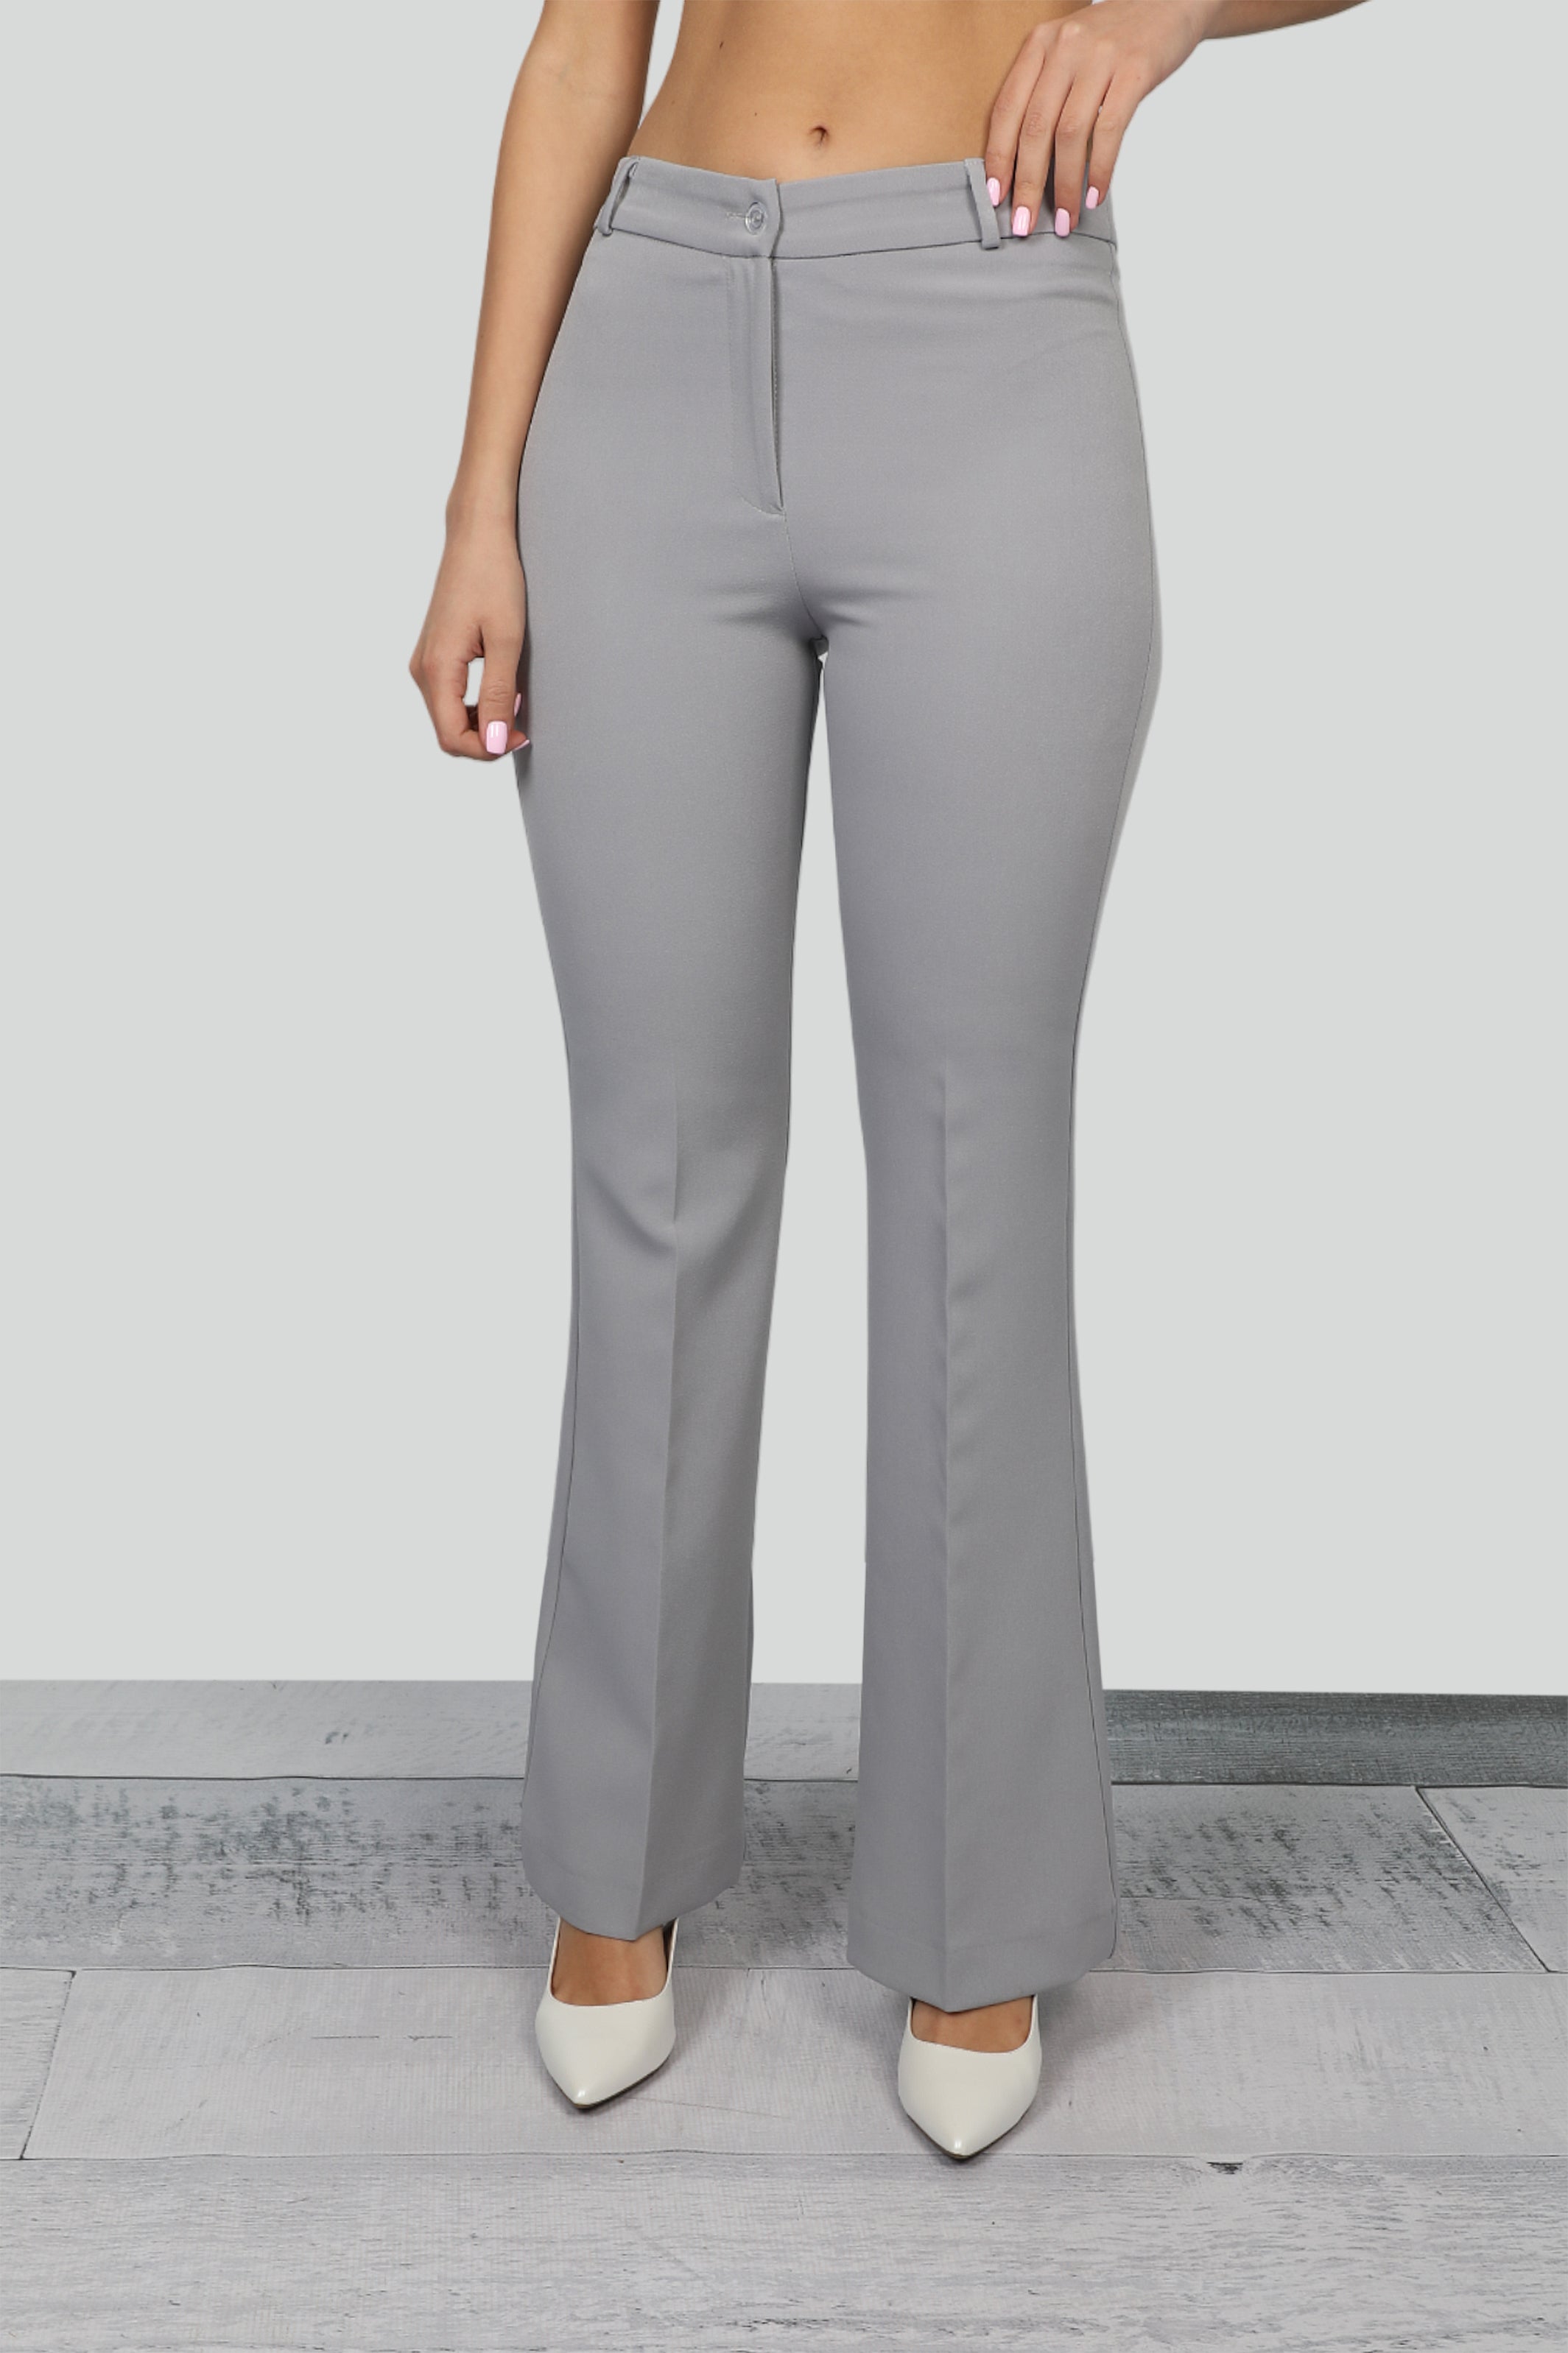 Classy Flare Grey Pants With Zipper To Close